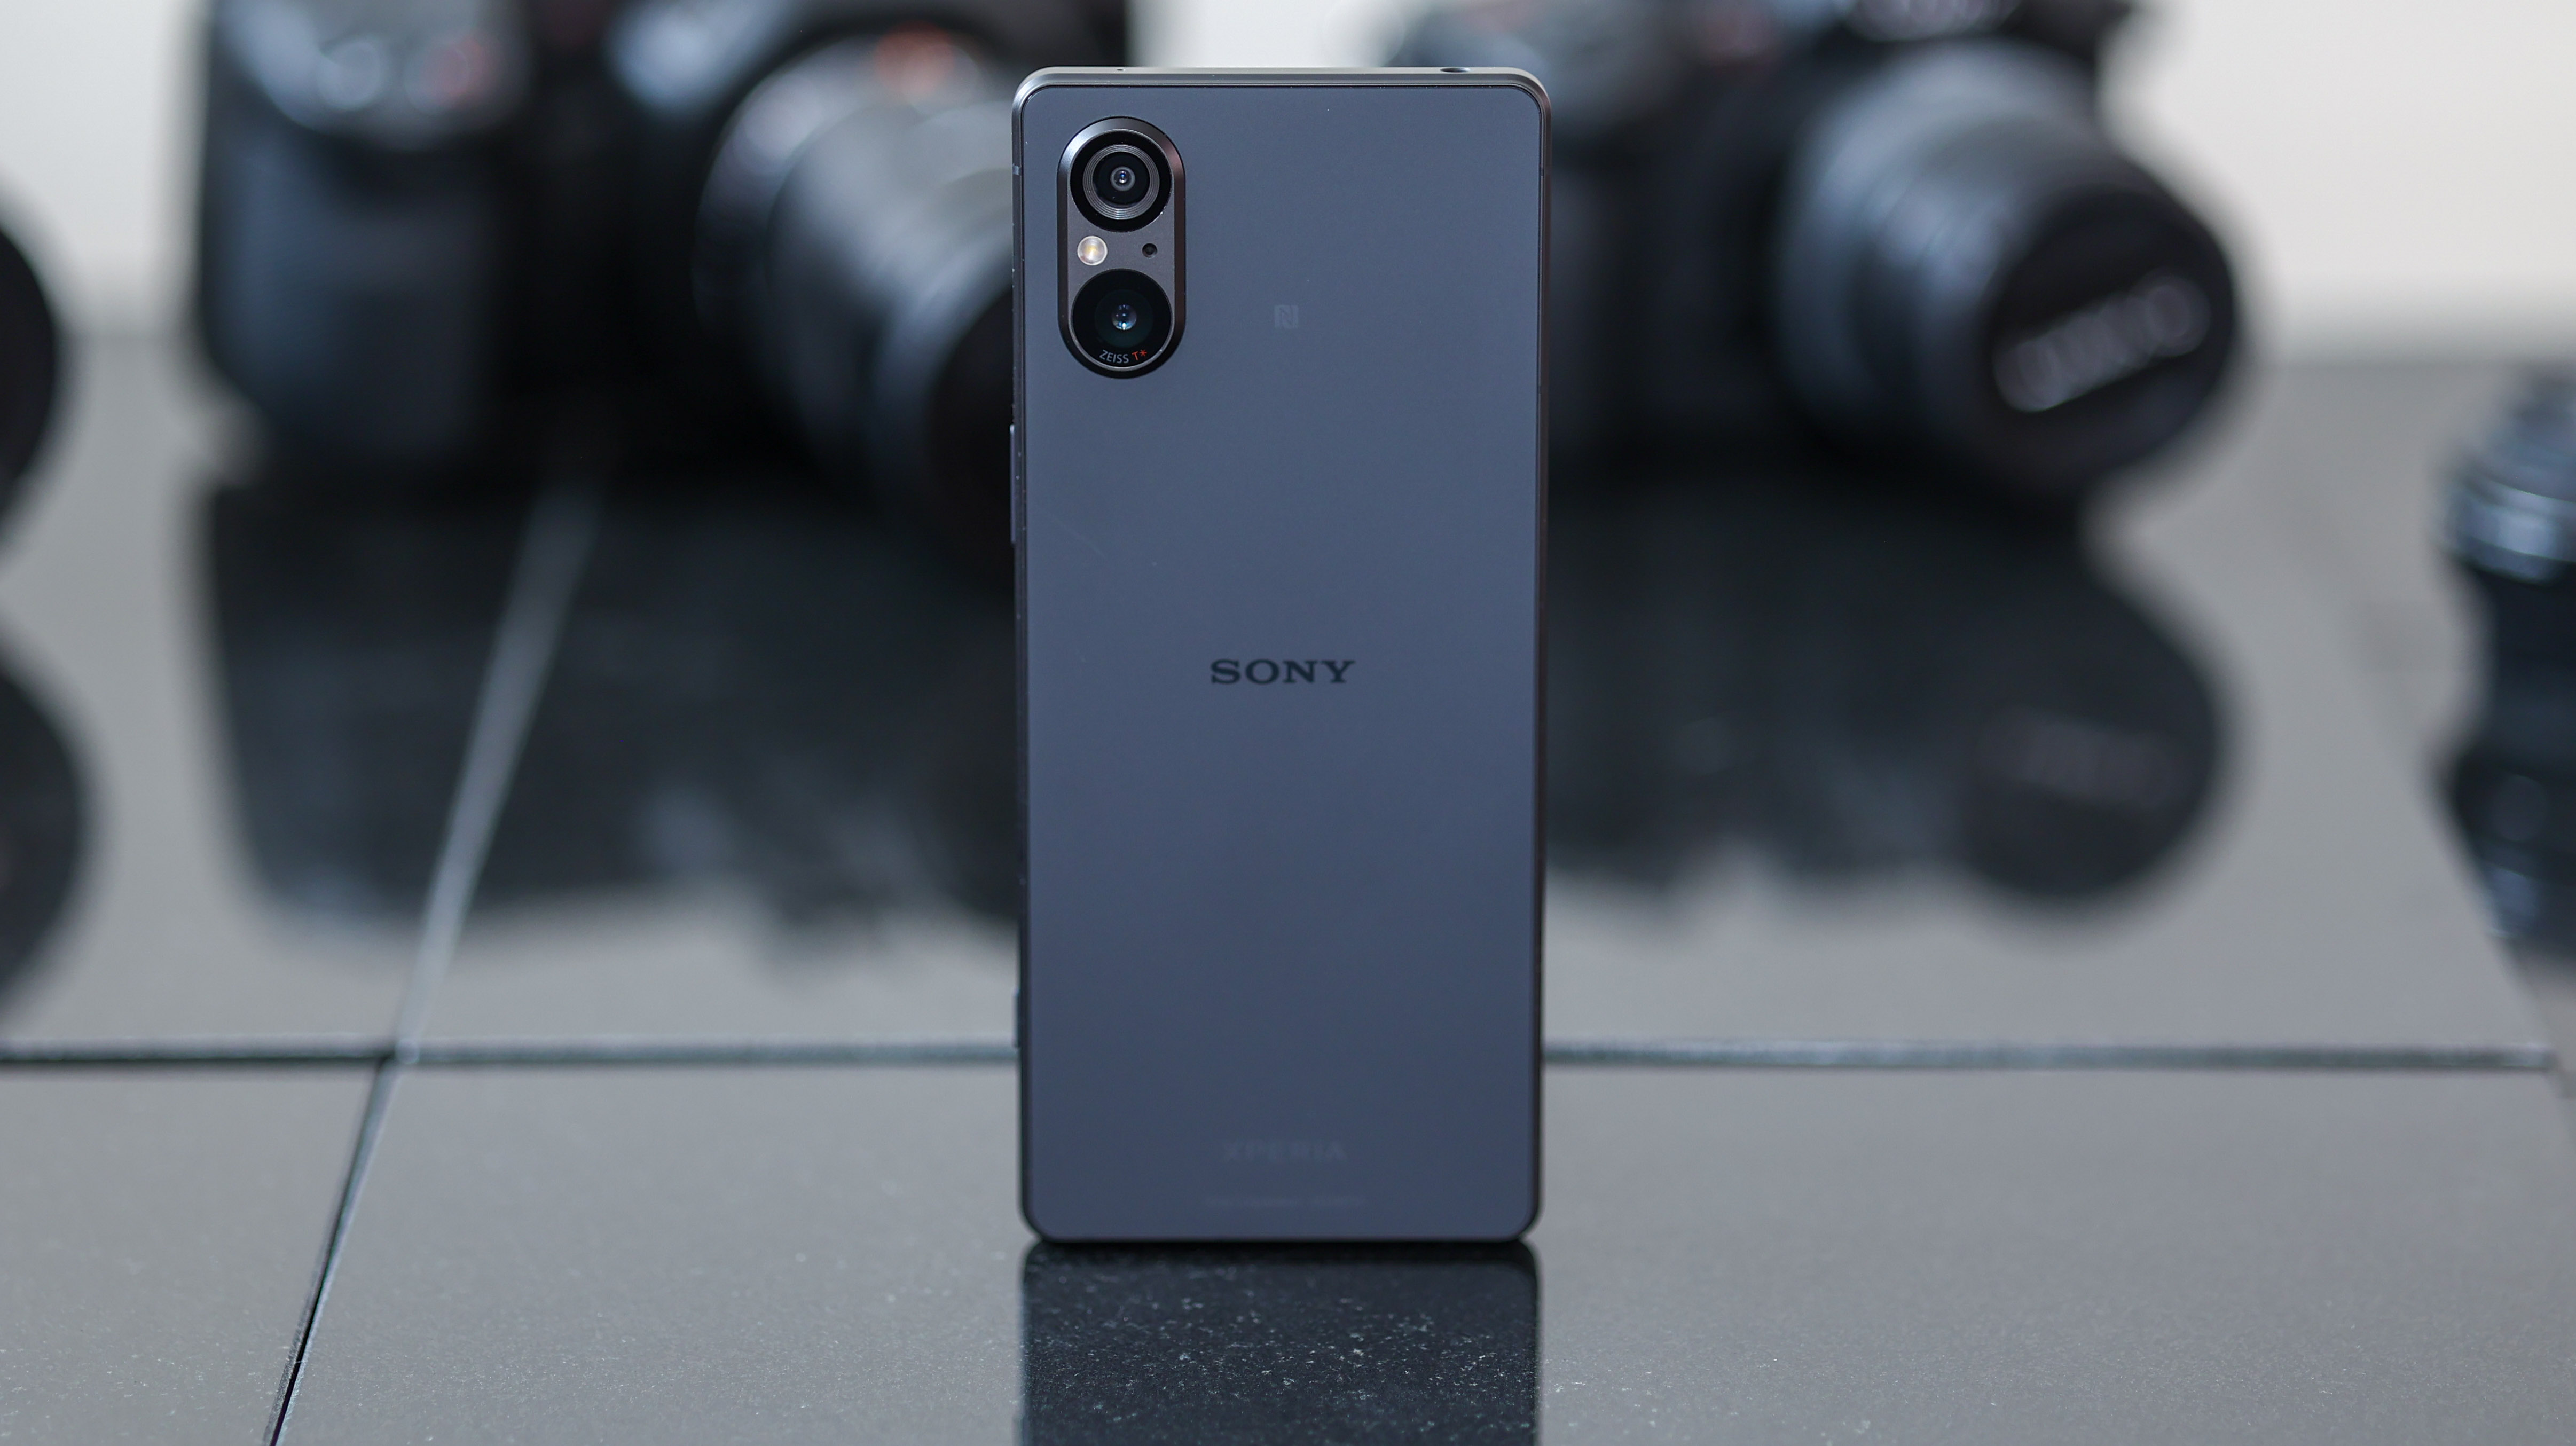 Sony Xperia 5 V vs Sony Xperia 10 V: Which Is Best For You